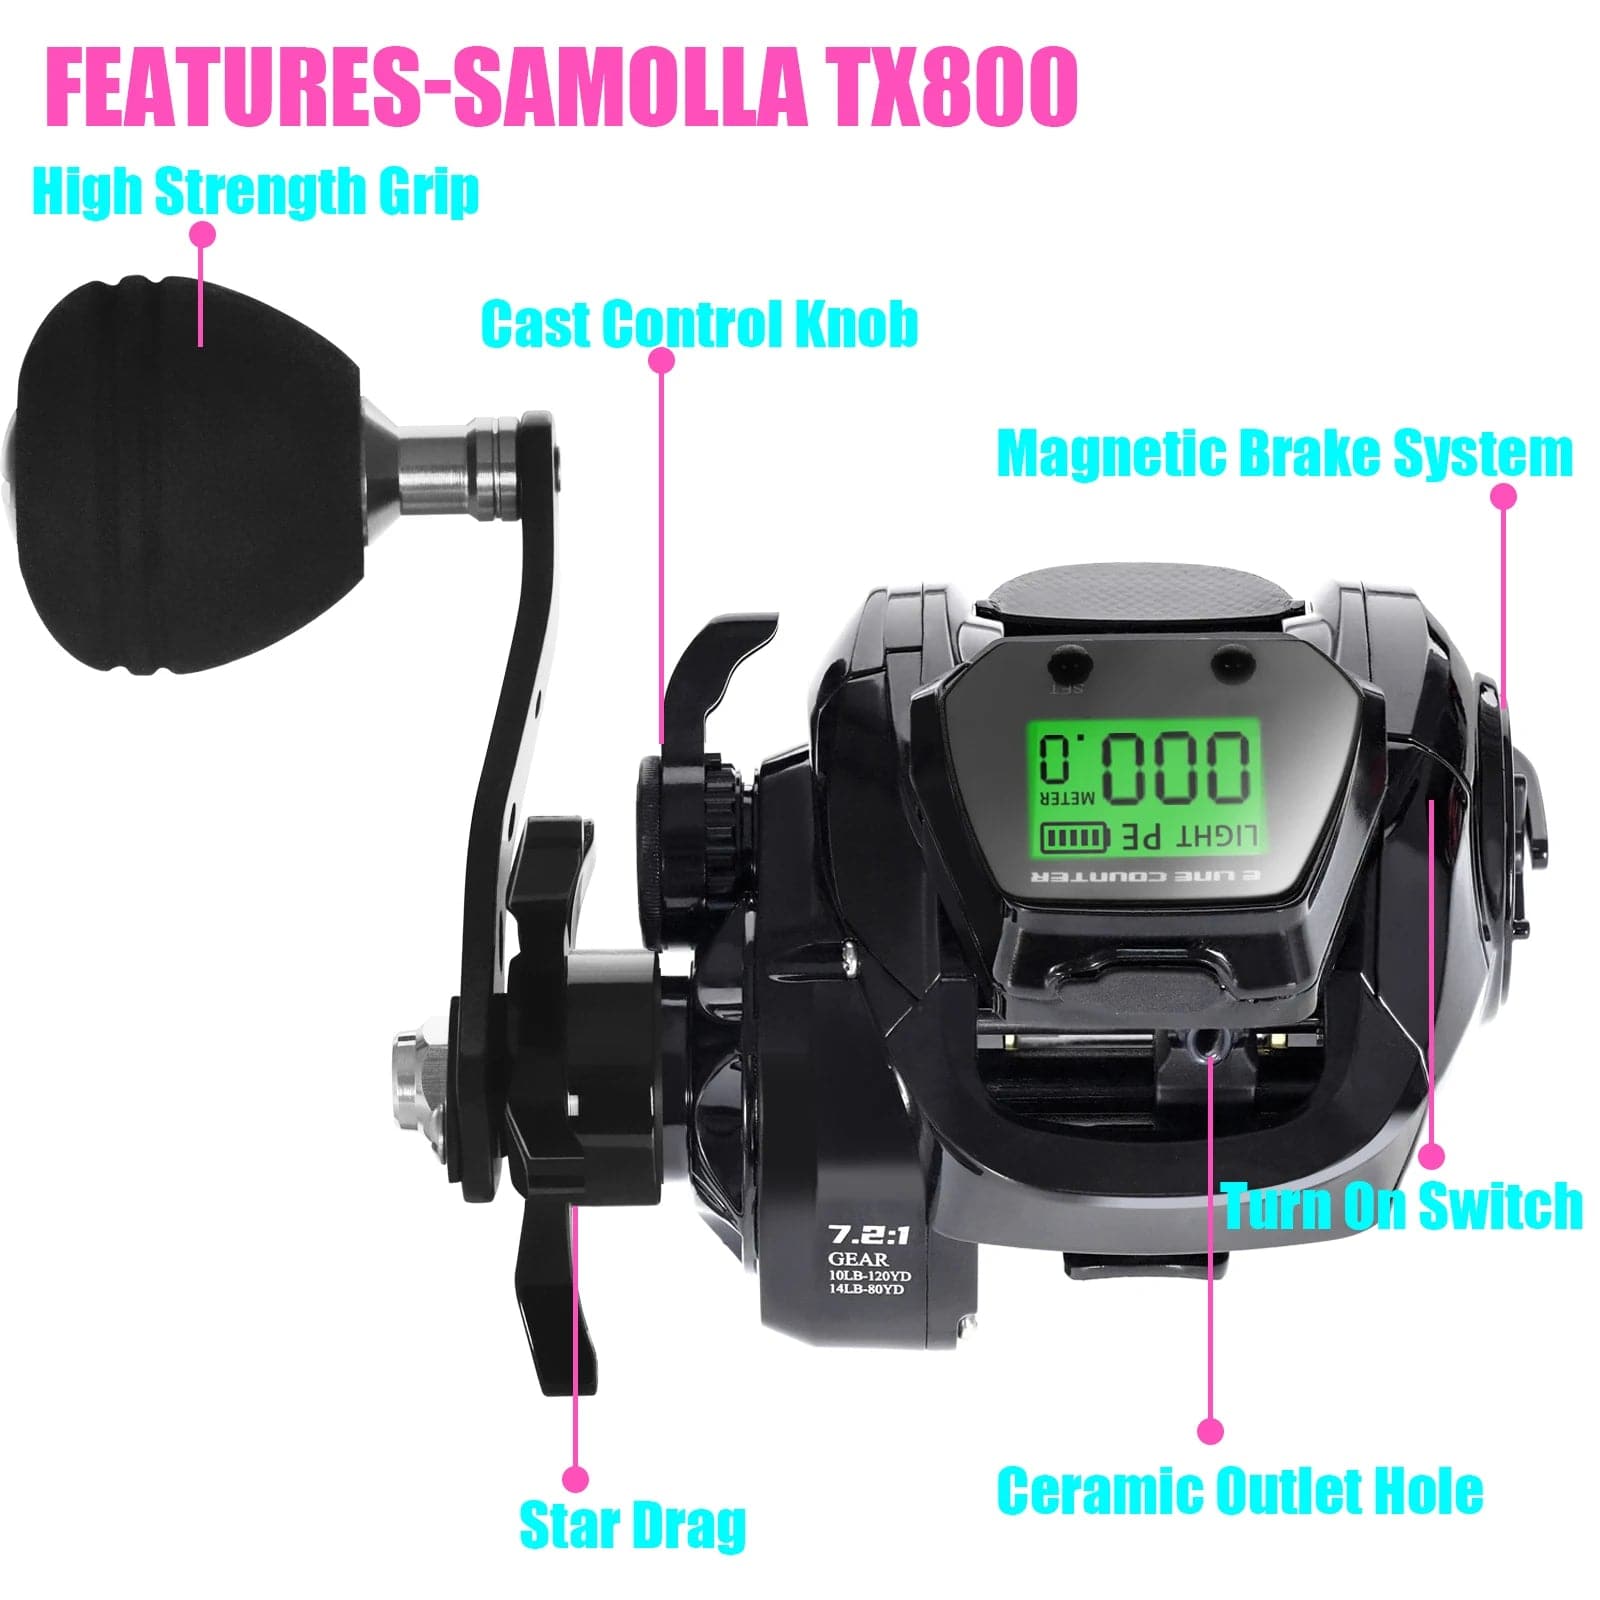 High-Speed Baitcasting Reel with Digital Display - Saltwater & Freshwater Compatible - Betatton - 